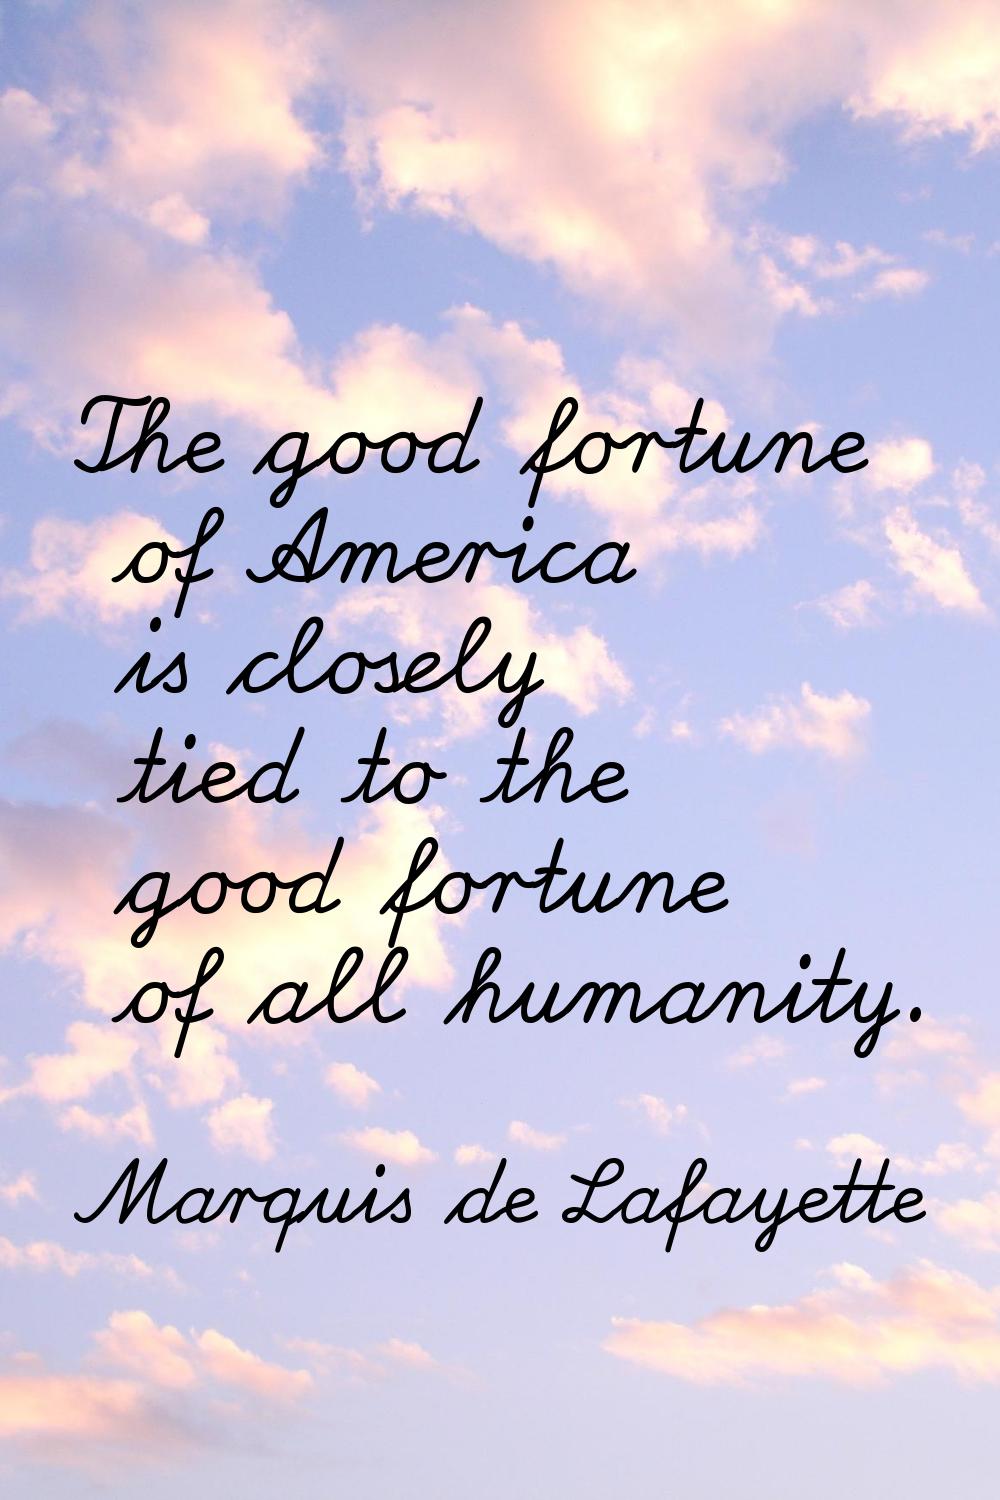 The good fortune of America is closely tied to the good fortune of all humanity.